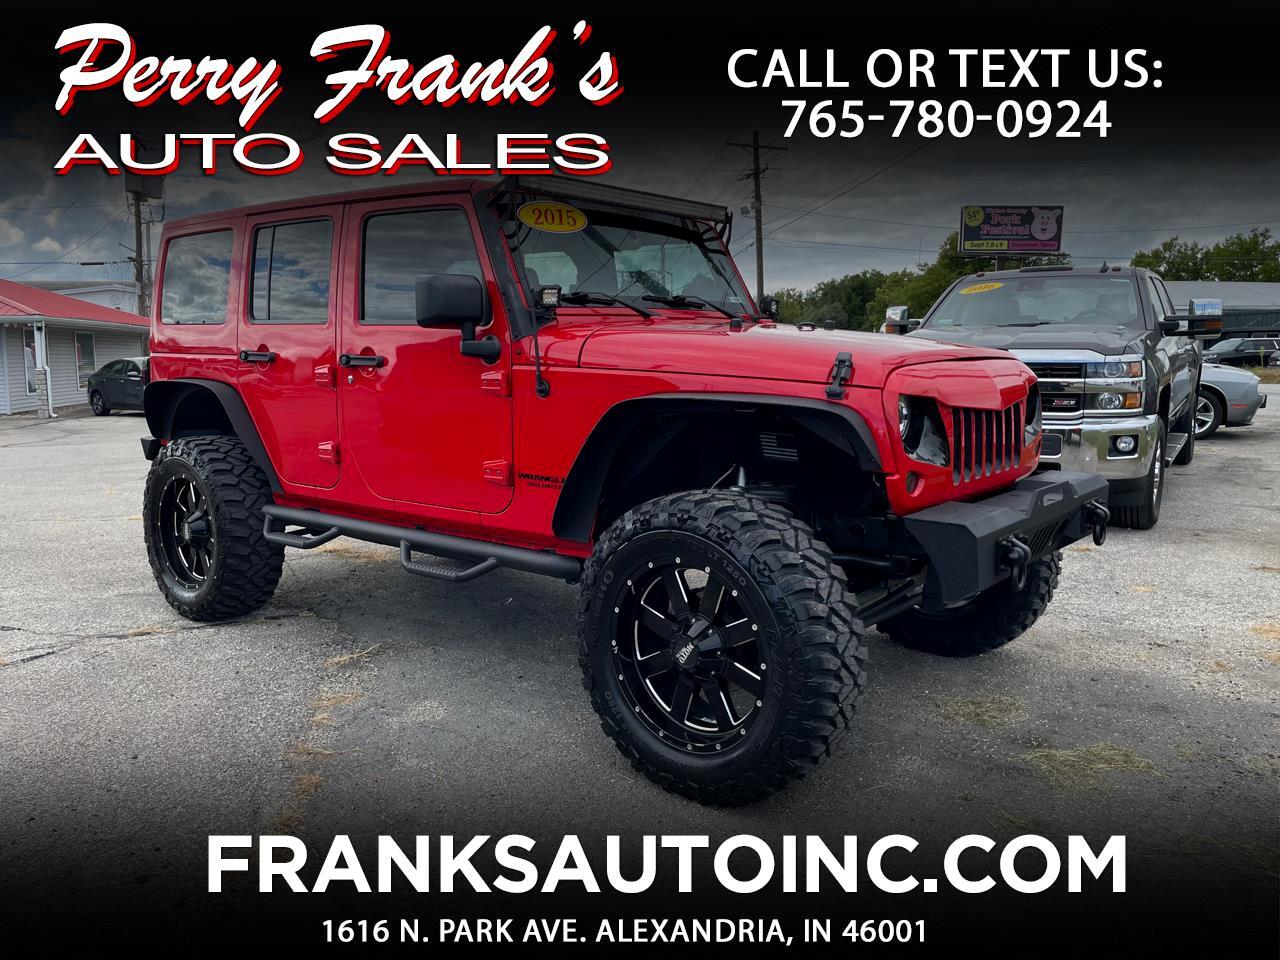 2015 Jeep Wrangler Unlimited 4WD 4dr Rubicon